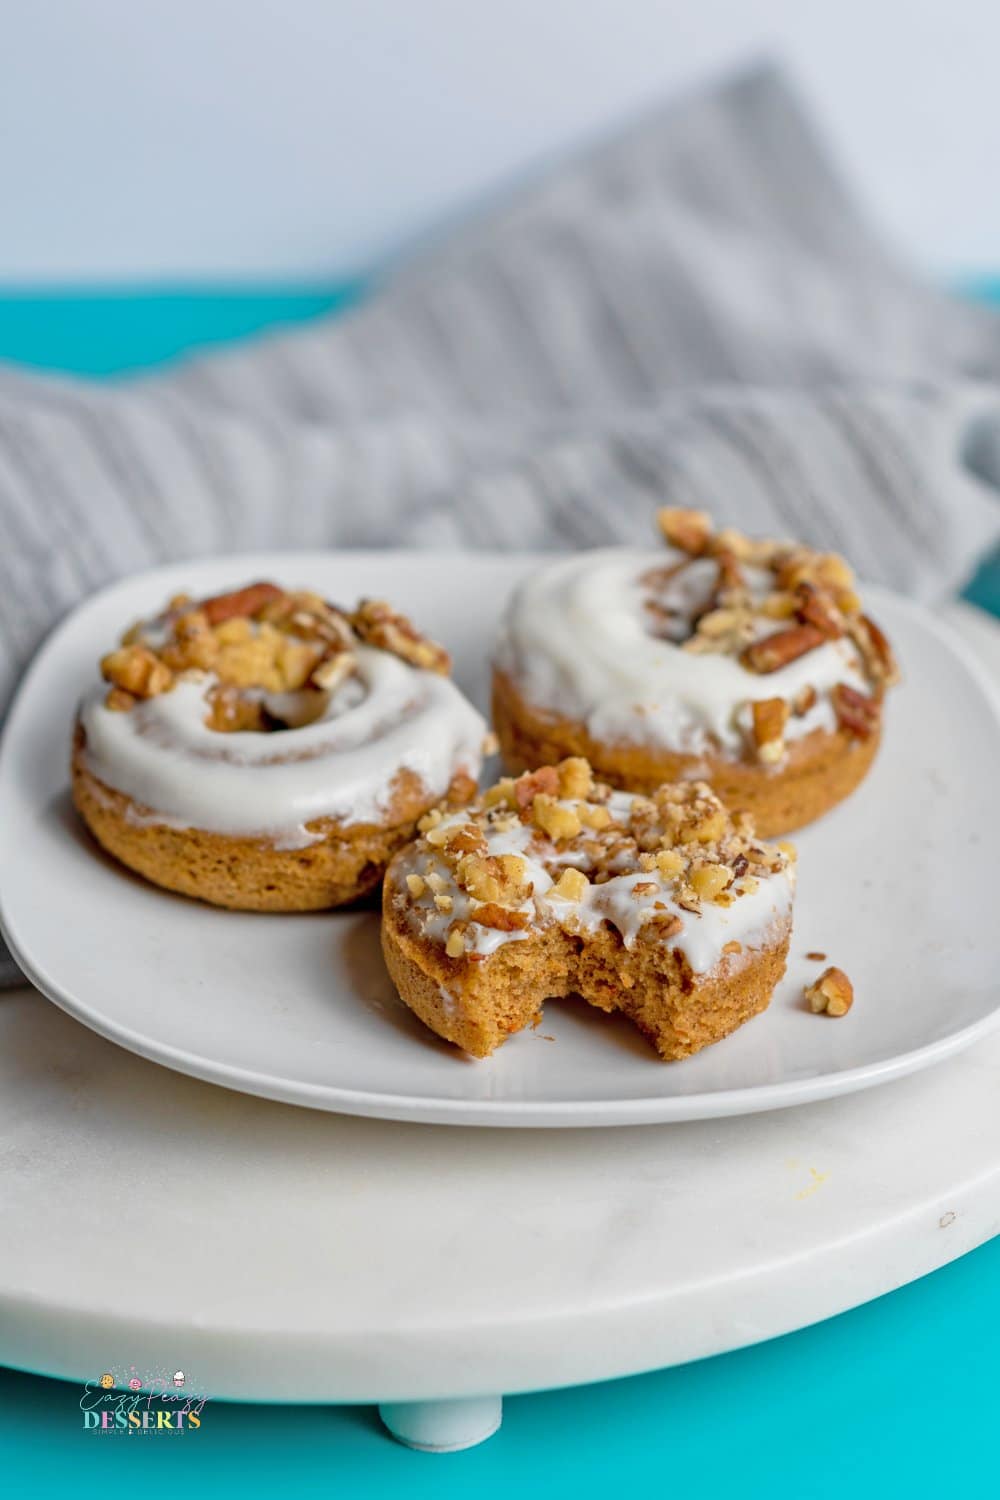 Carrot donuts